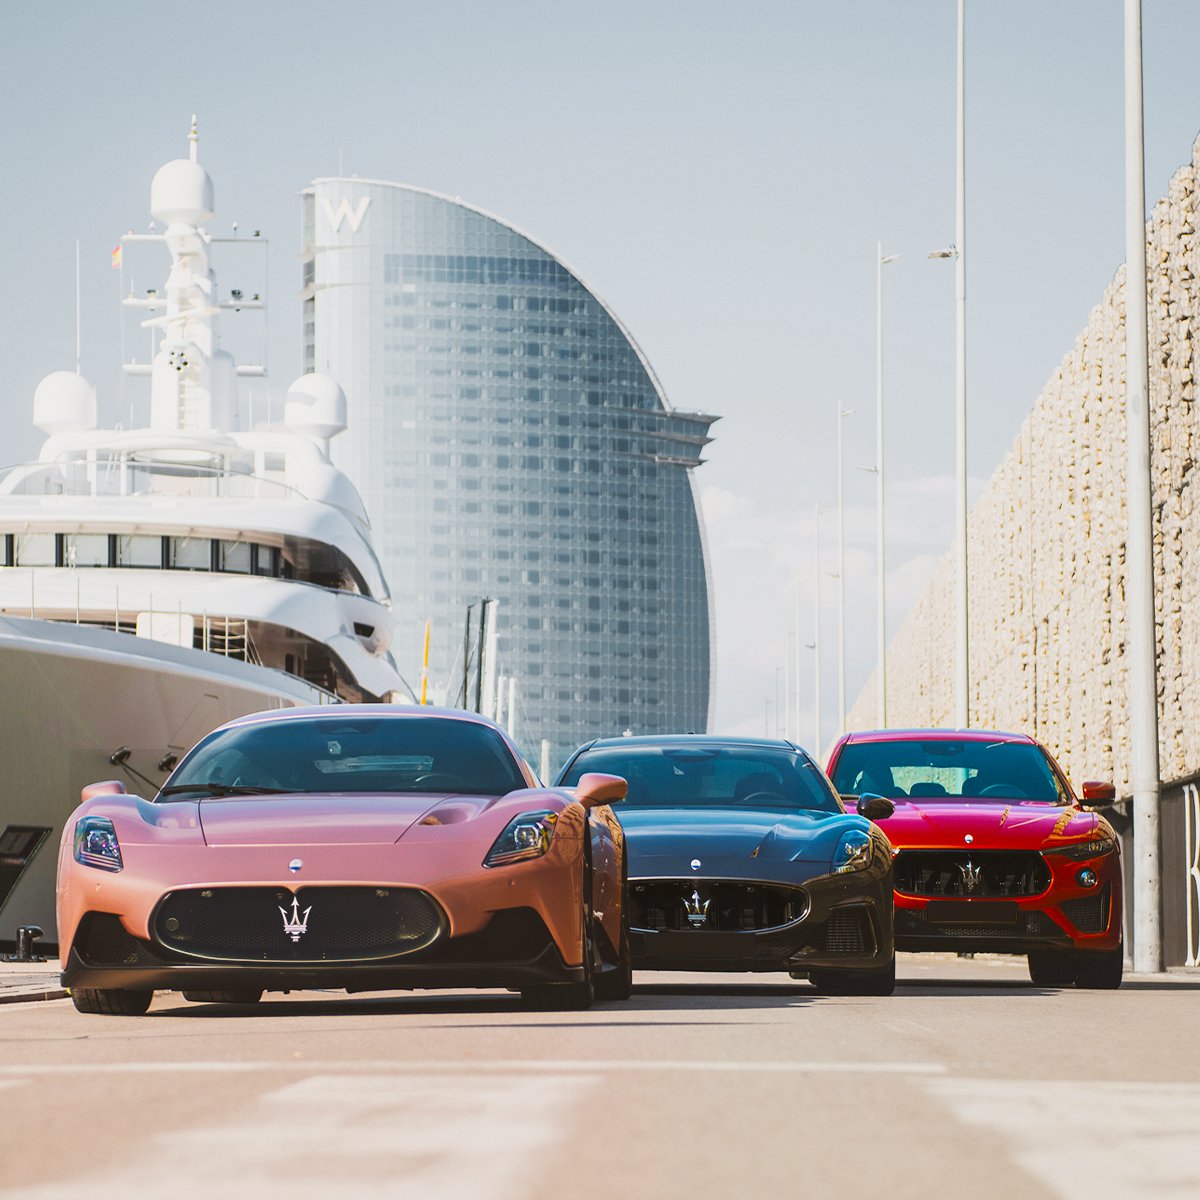 Powerful + Iconic + Adventurous = MC20 + GranTurismo + Levante
A little Maserati math equation. Or in other words, a whole lot of Trident power on tour in Barcelona.
#Maserati #MaseratiMC20 #MaseratiGranTurismo #MaseratiLevante